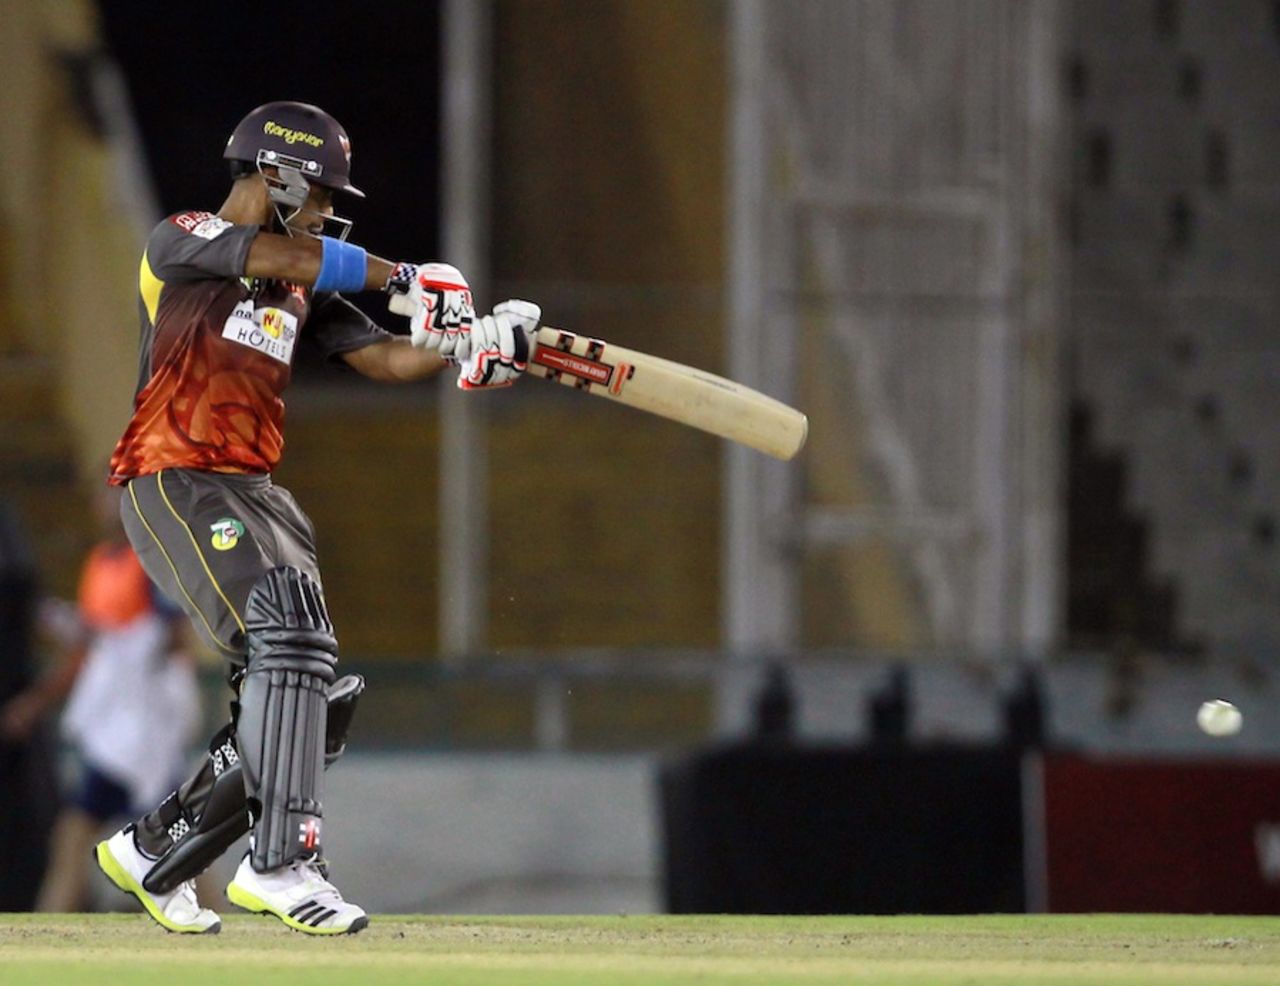 JP Duminy led Sunrisers to 143 with a fifty, Sunrisers Hyderabad v Otago Volts, CLT20 qualifier, Mohali, September 20. 2013